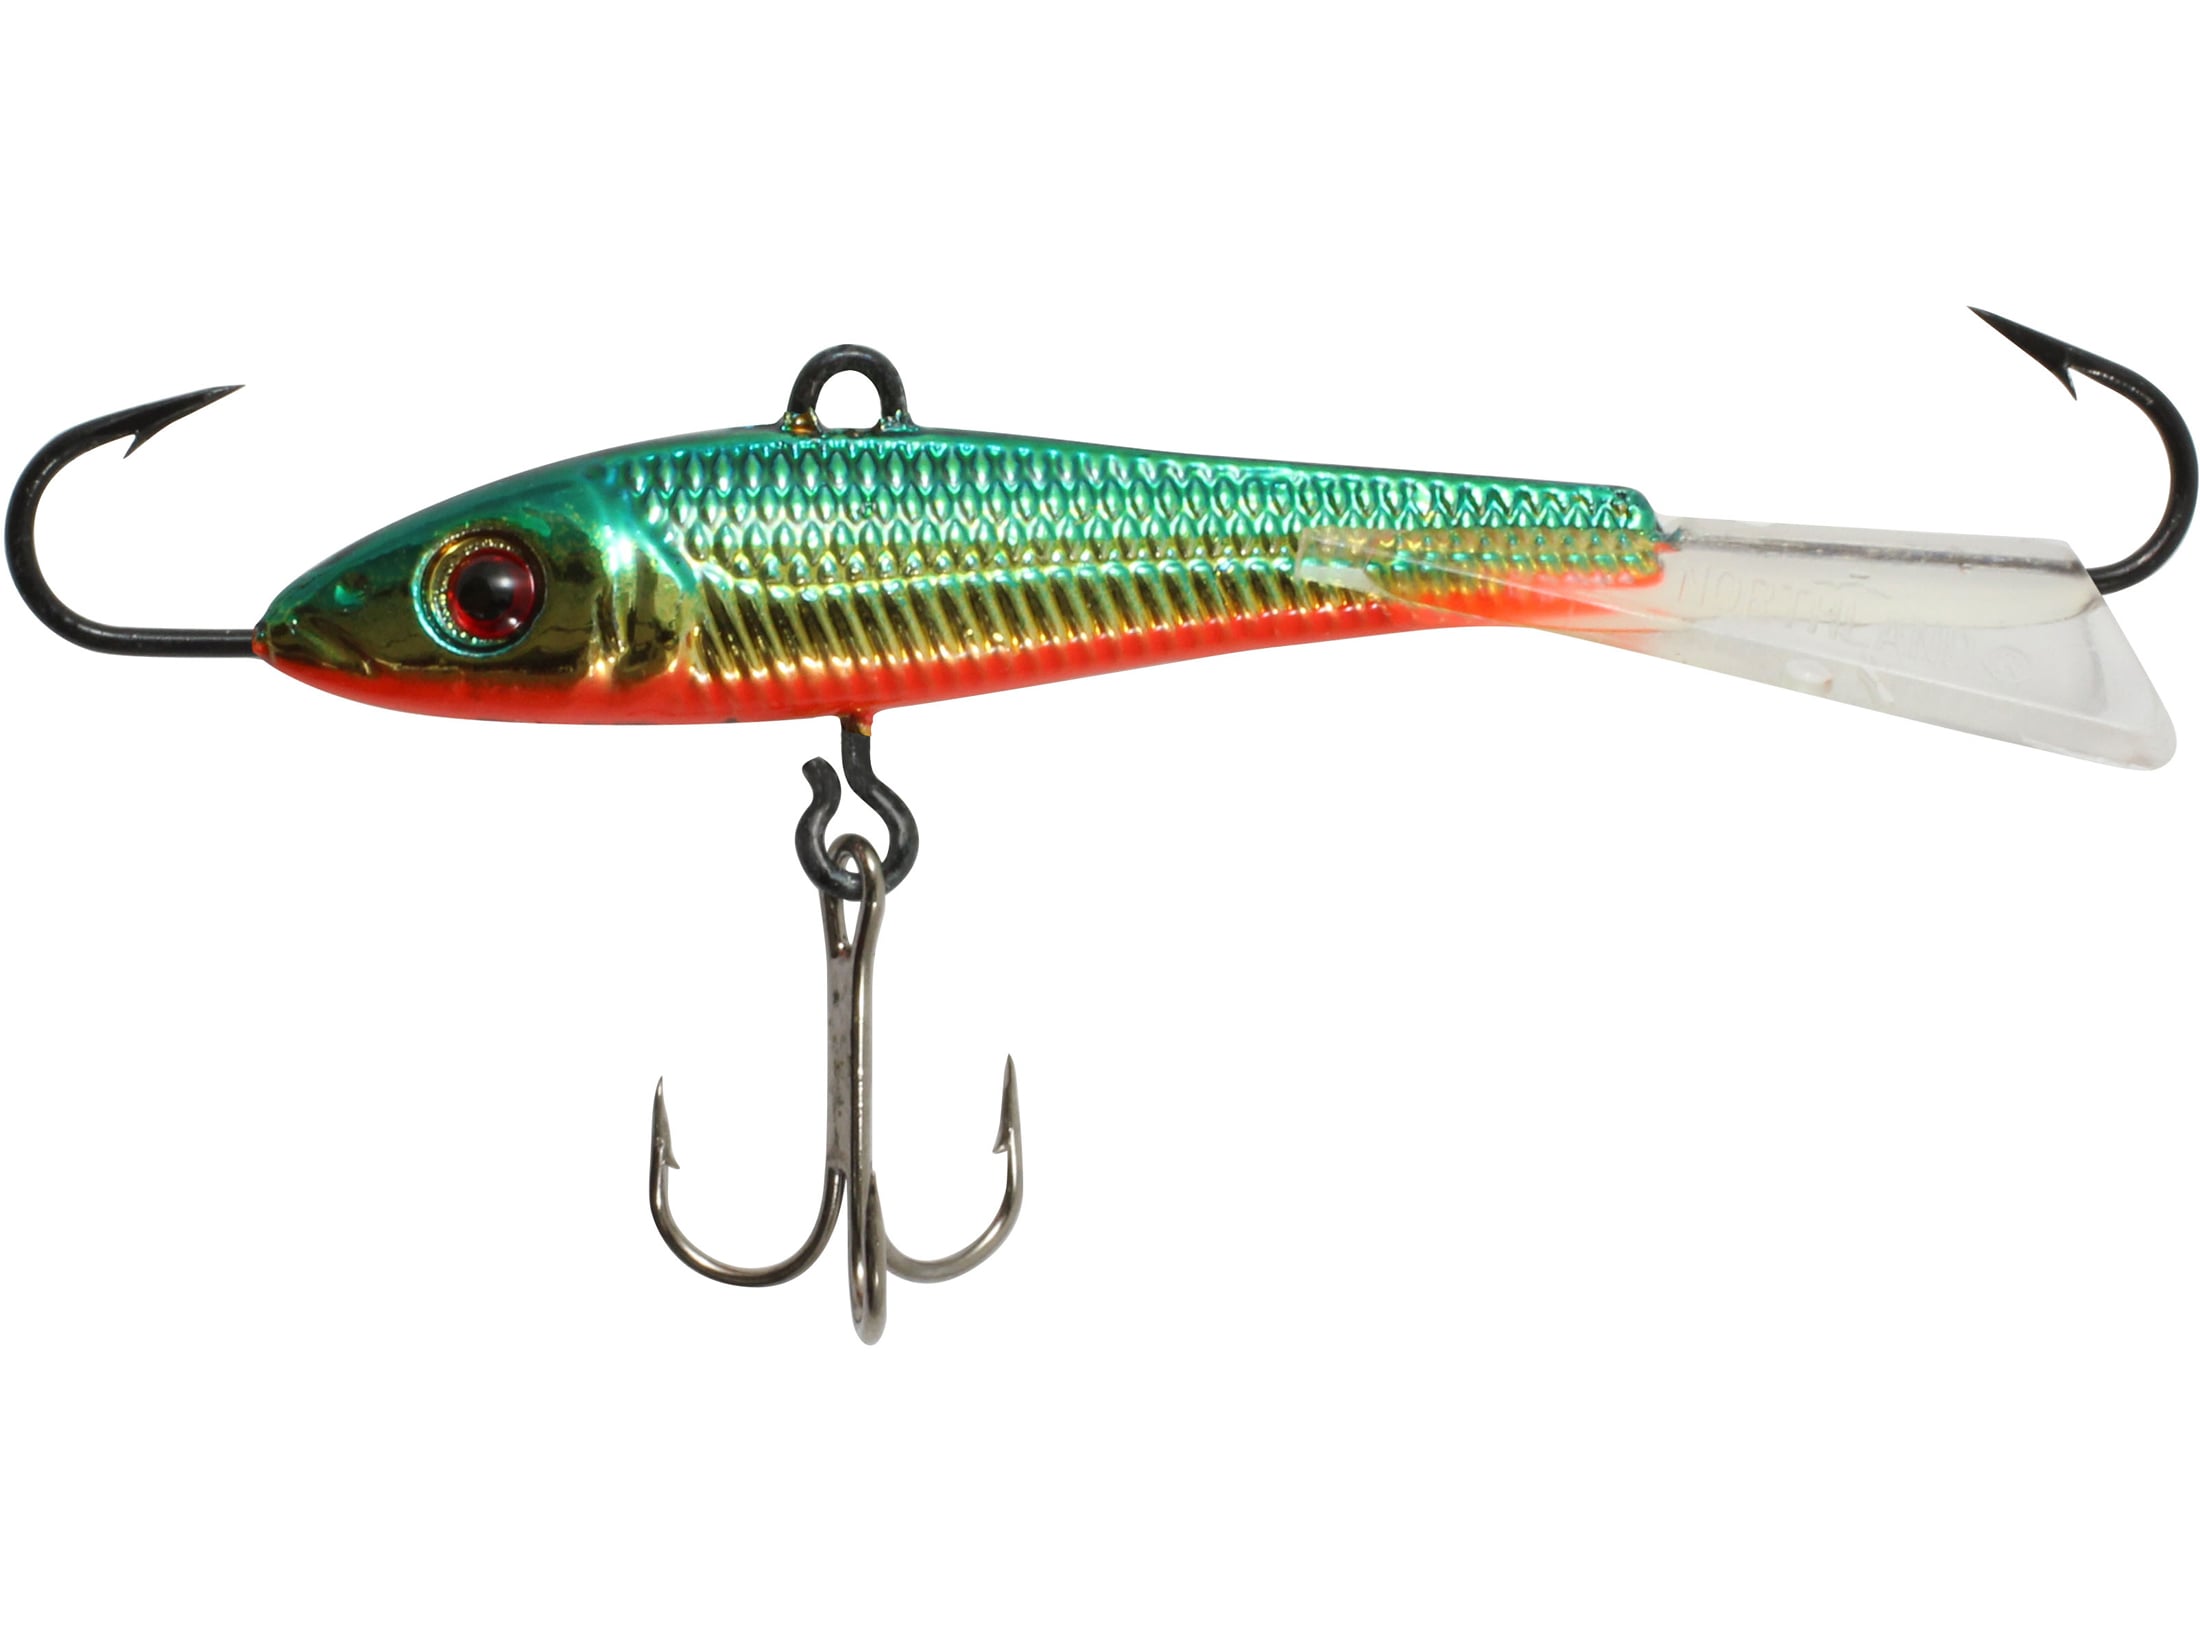 NORTHLAND FISHING TACKLE: 1/8 oz Puppet Minnow GLO PERCH